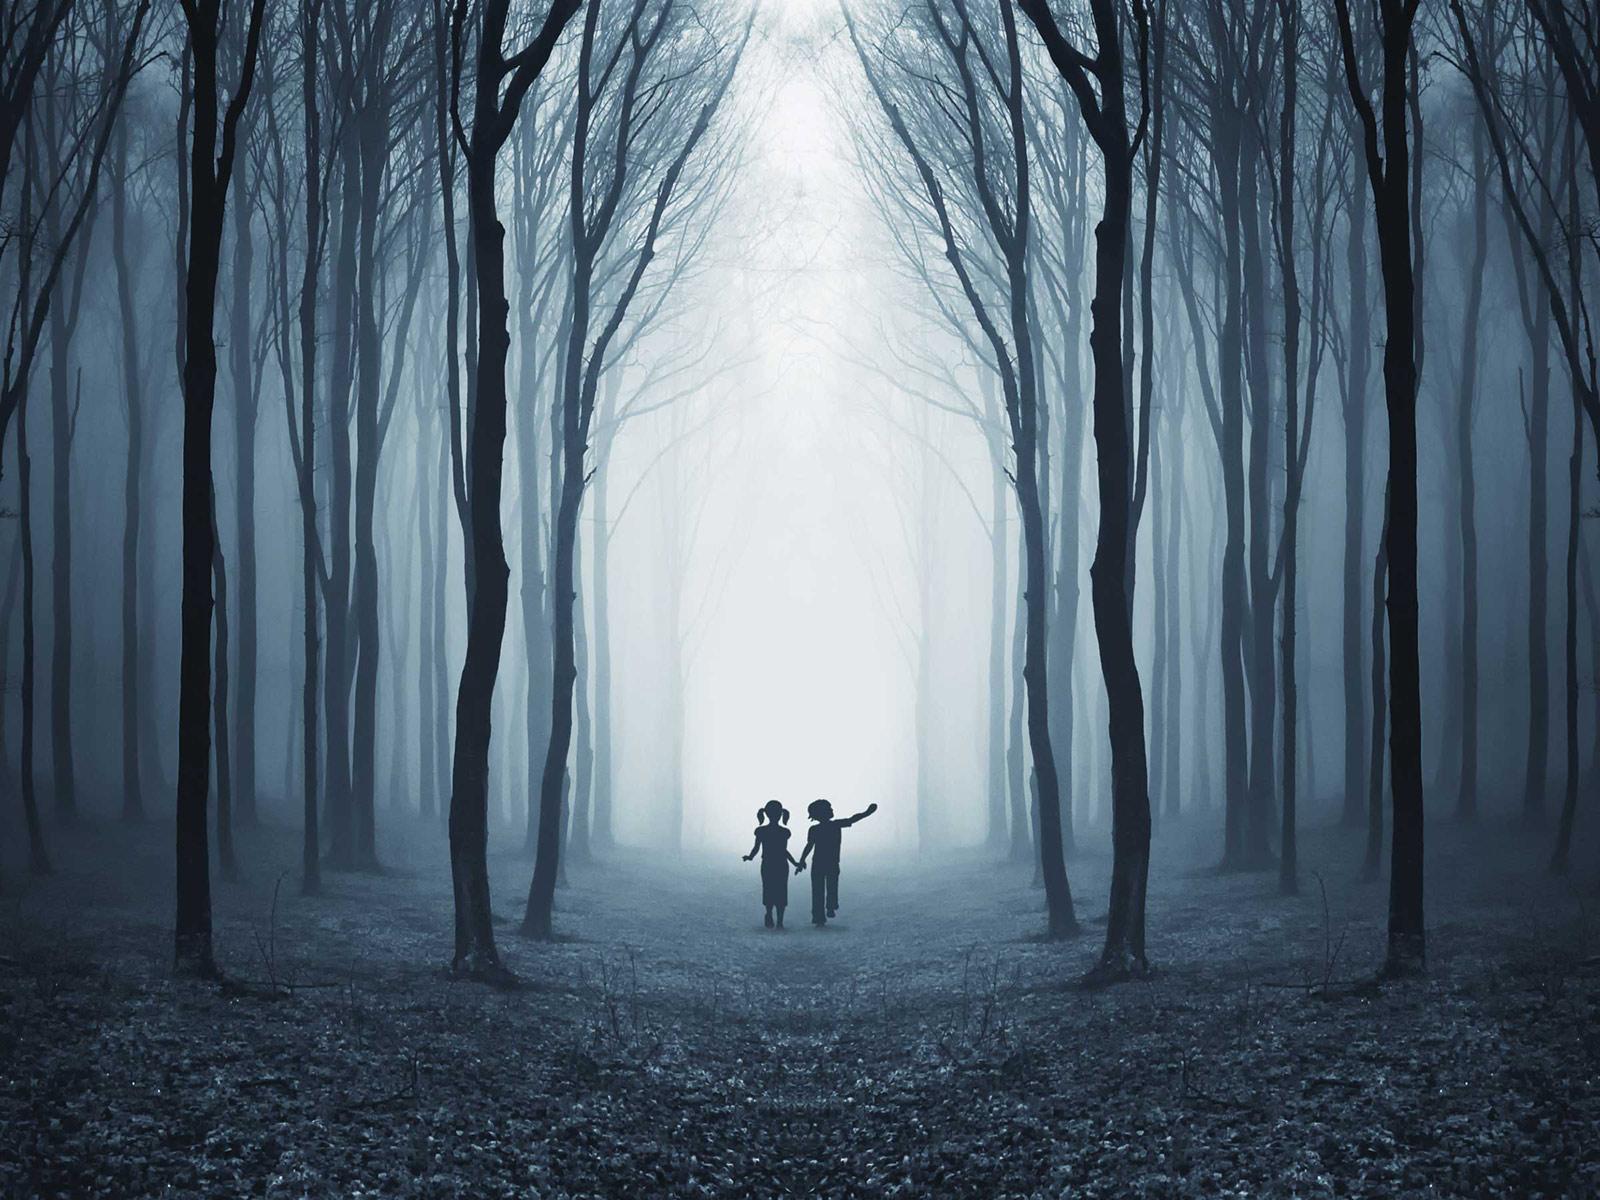 two tiny figures hold hands in an eerie forest